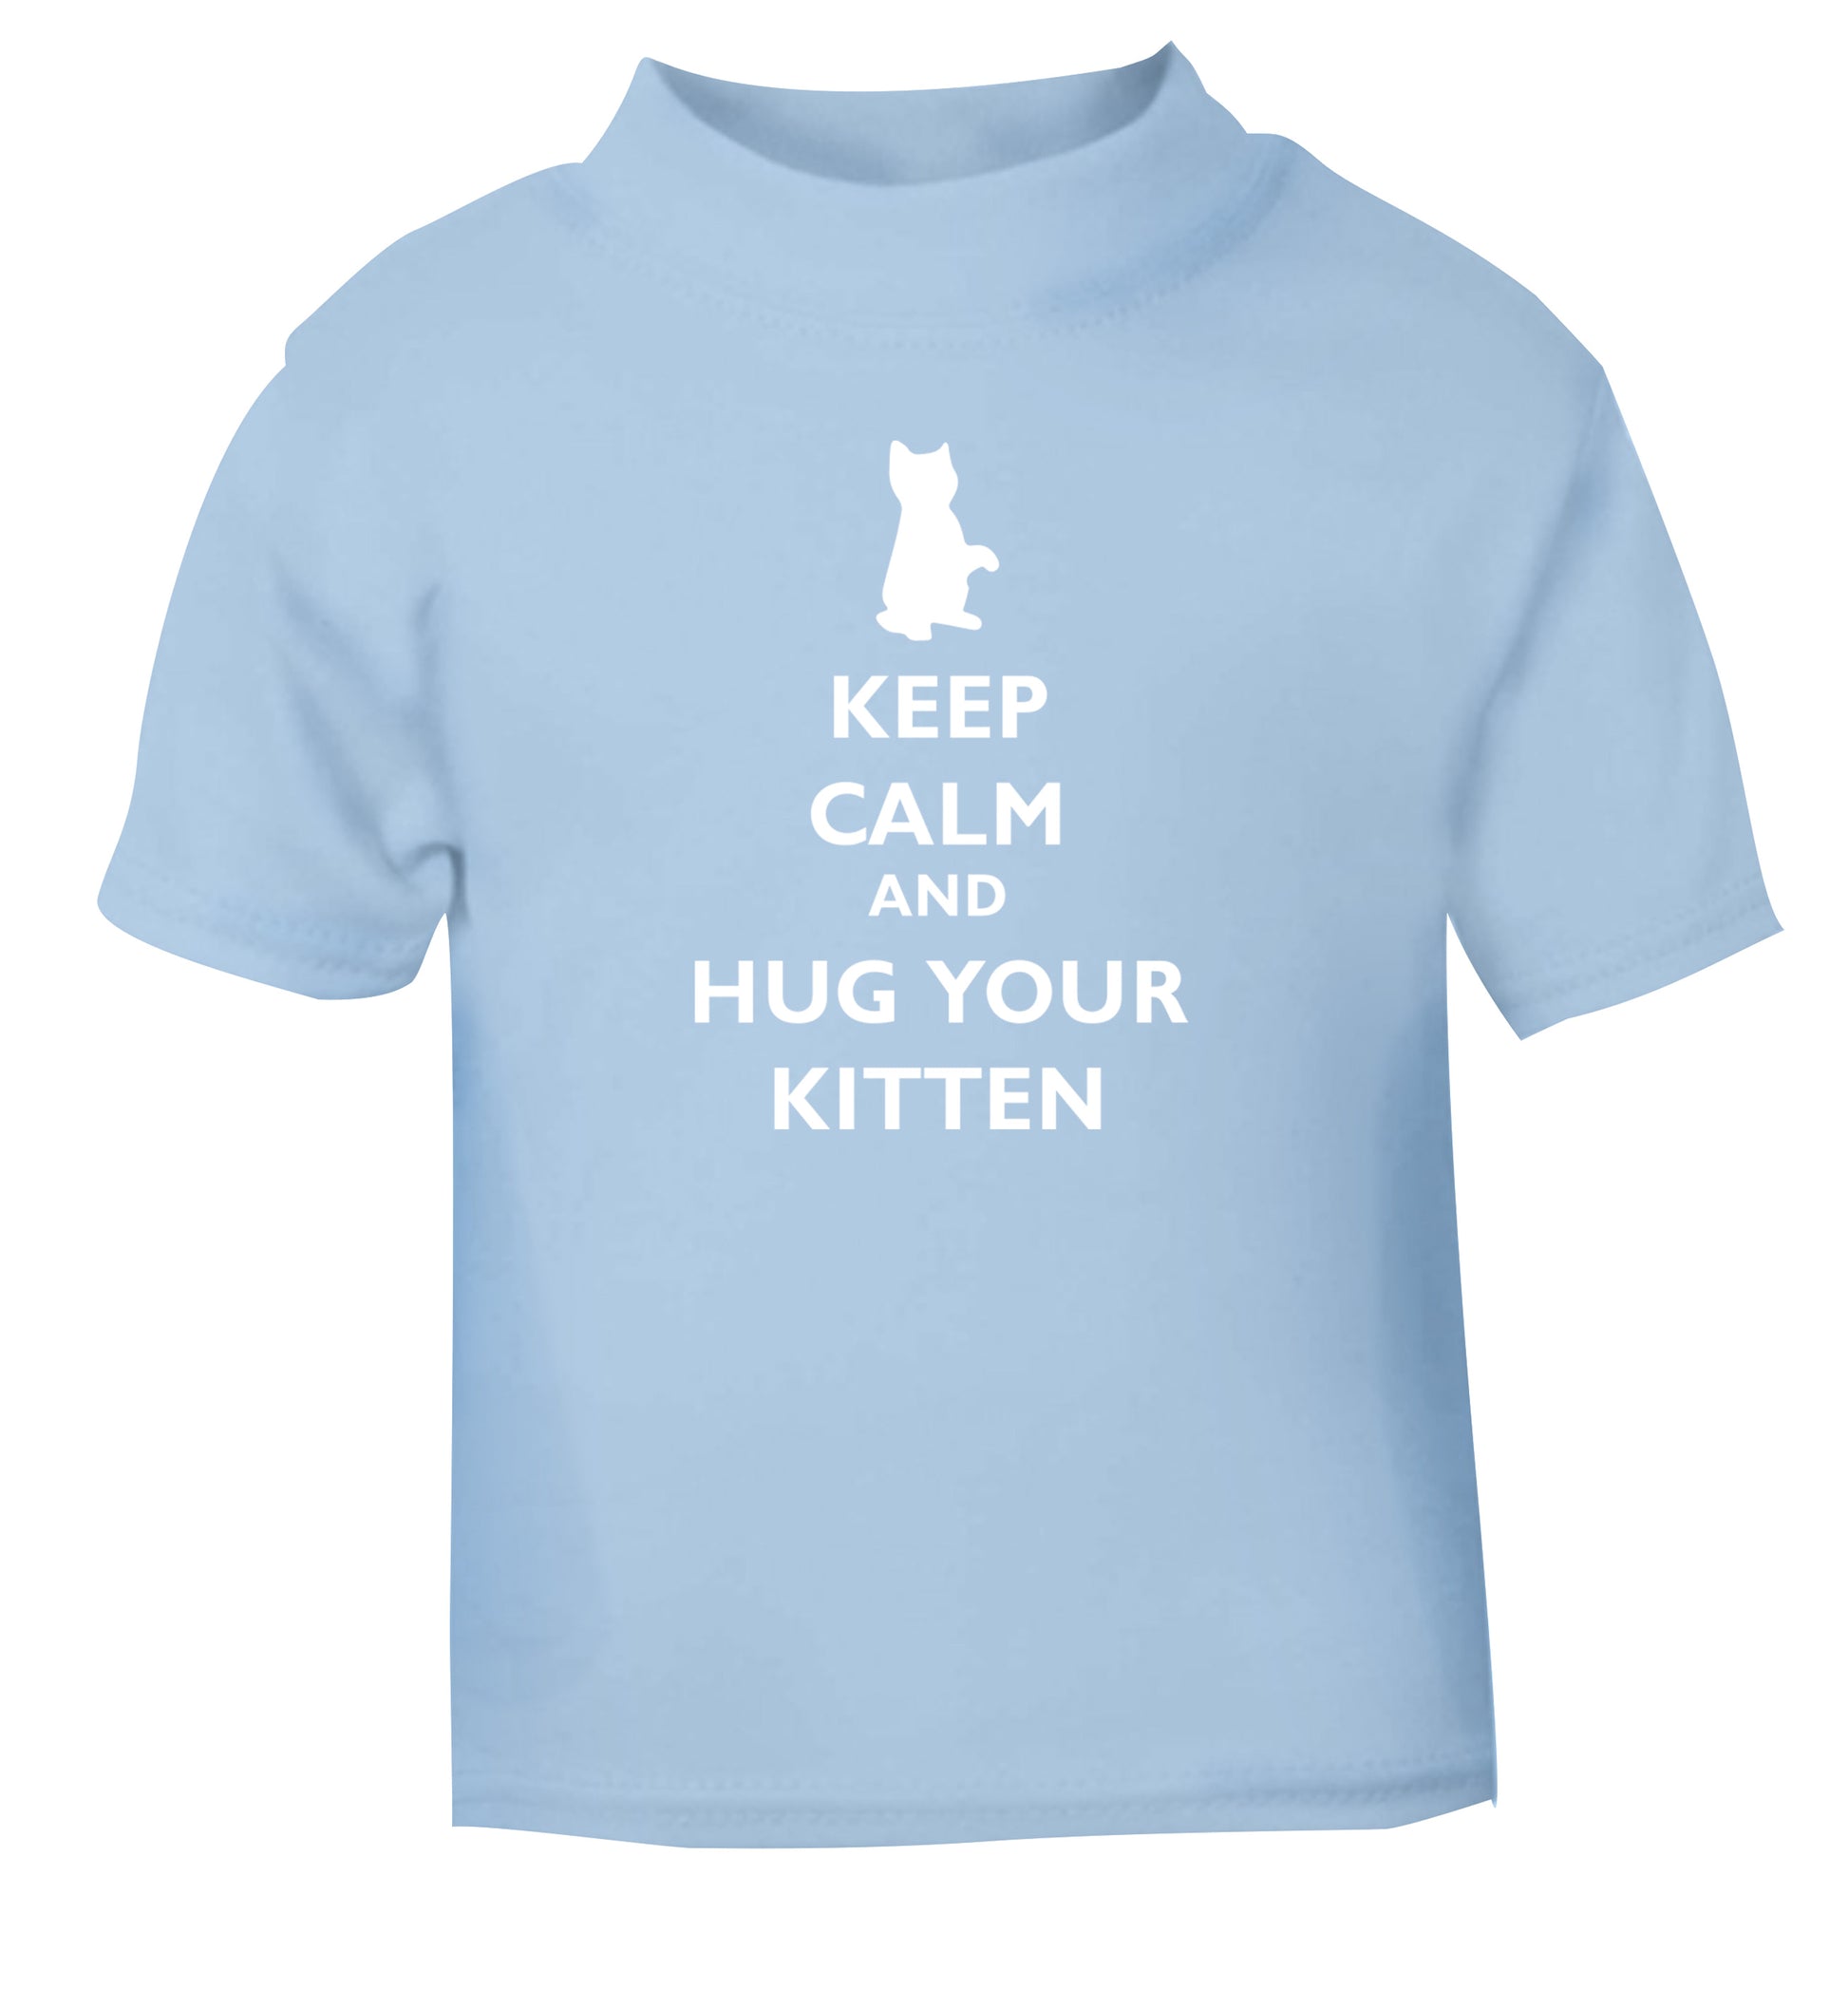 Keep calm and hug your kitten light blue Baby Toddler Tshirt 2 Years